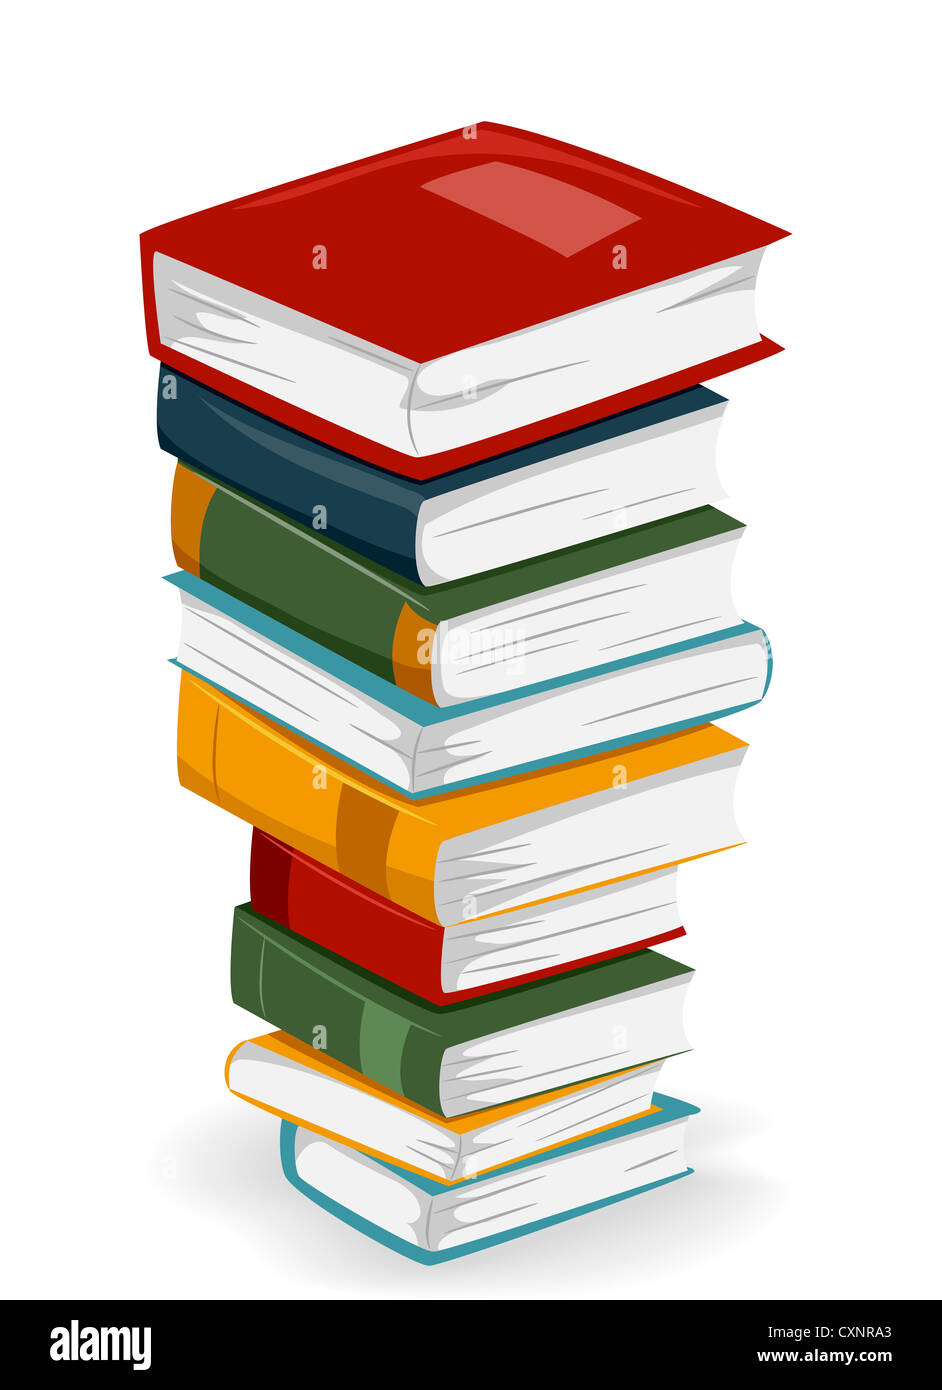 Illustration of a Tall Stack of Books with Different Covers Stock Photo